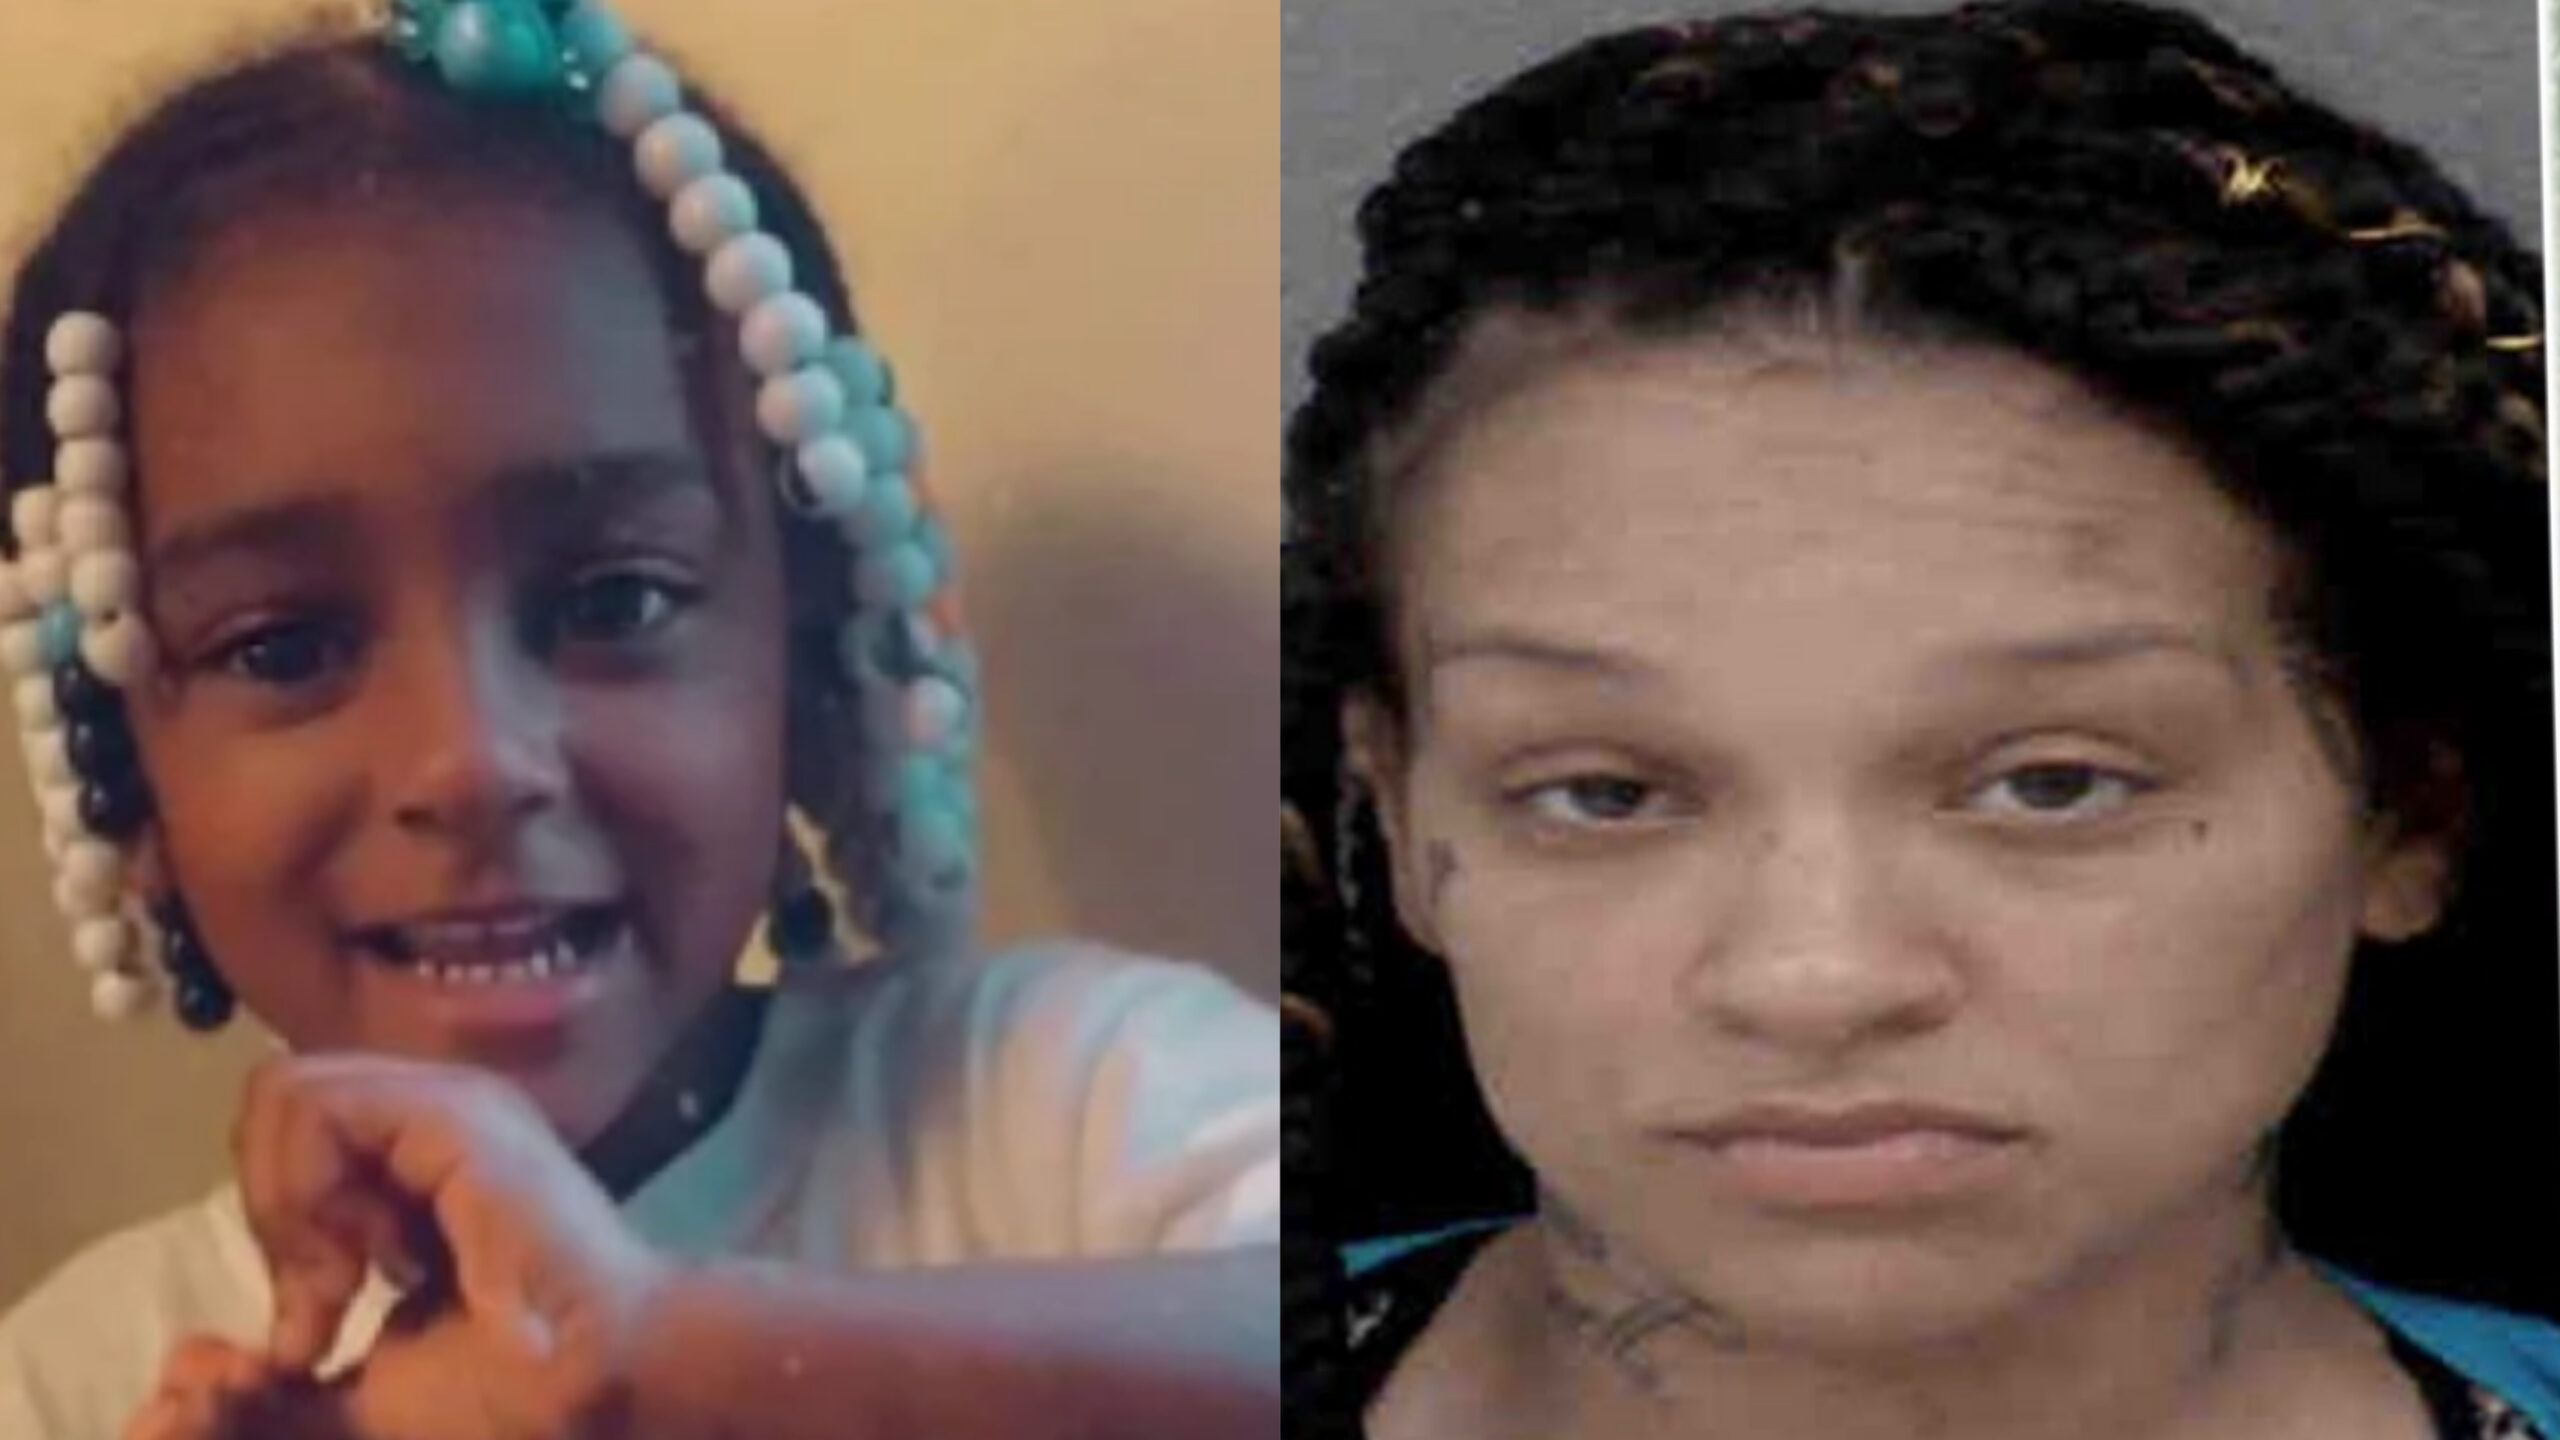 Mother Arrested and Charged in Murder of Missing 4-Year-Old » Illicit Deeds